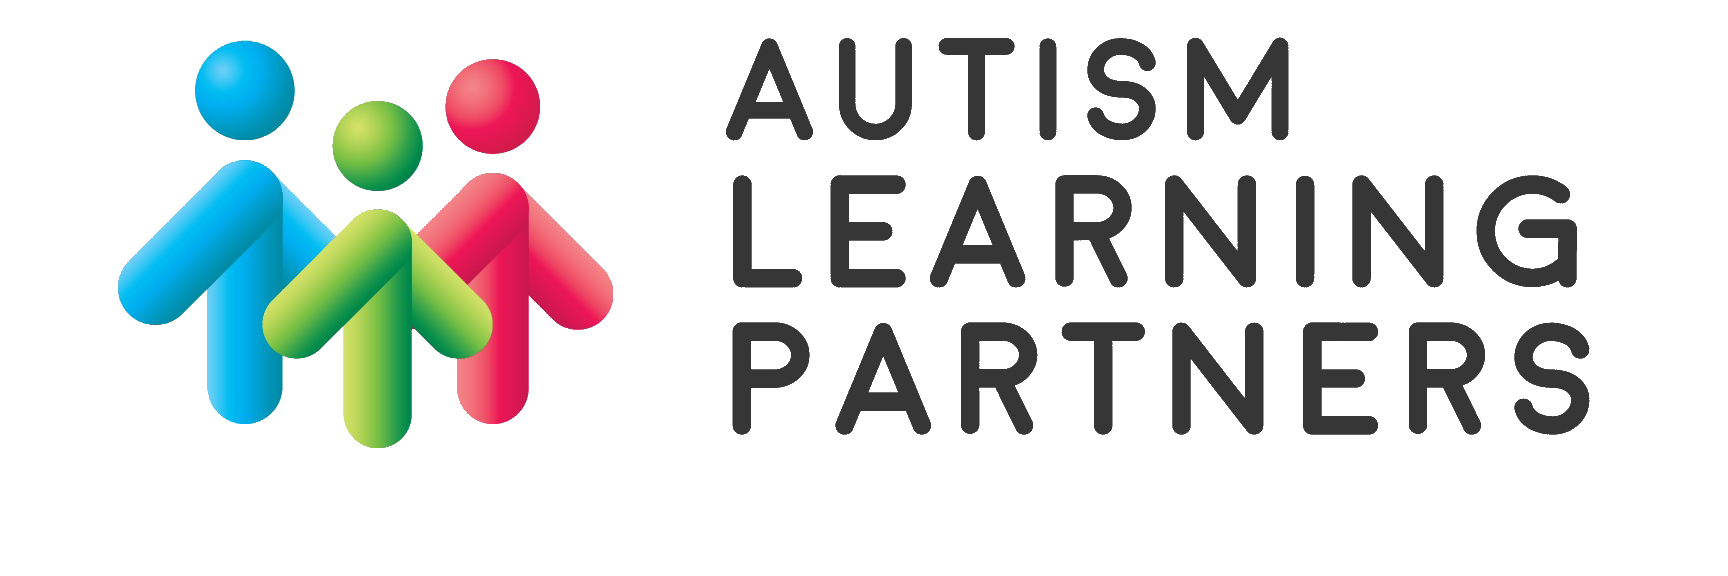 Autism Learning Partners - Making Progress Possible